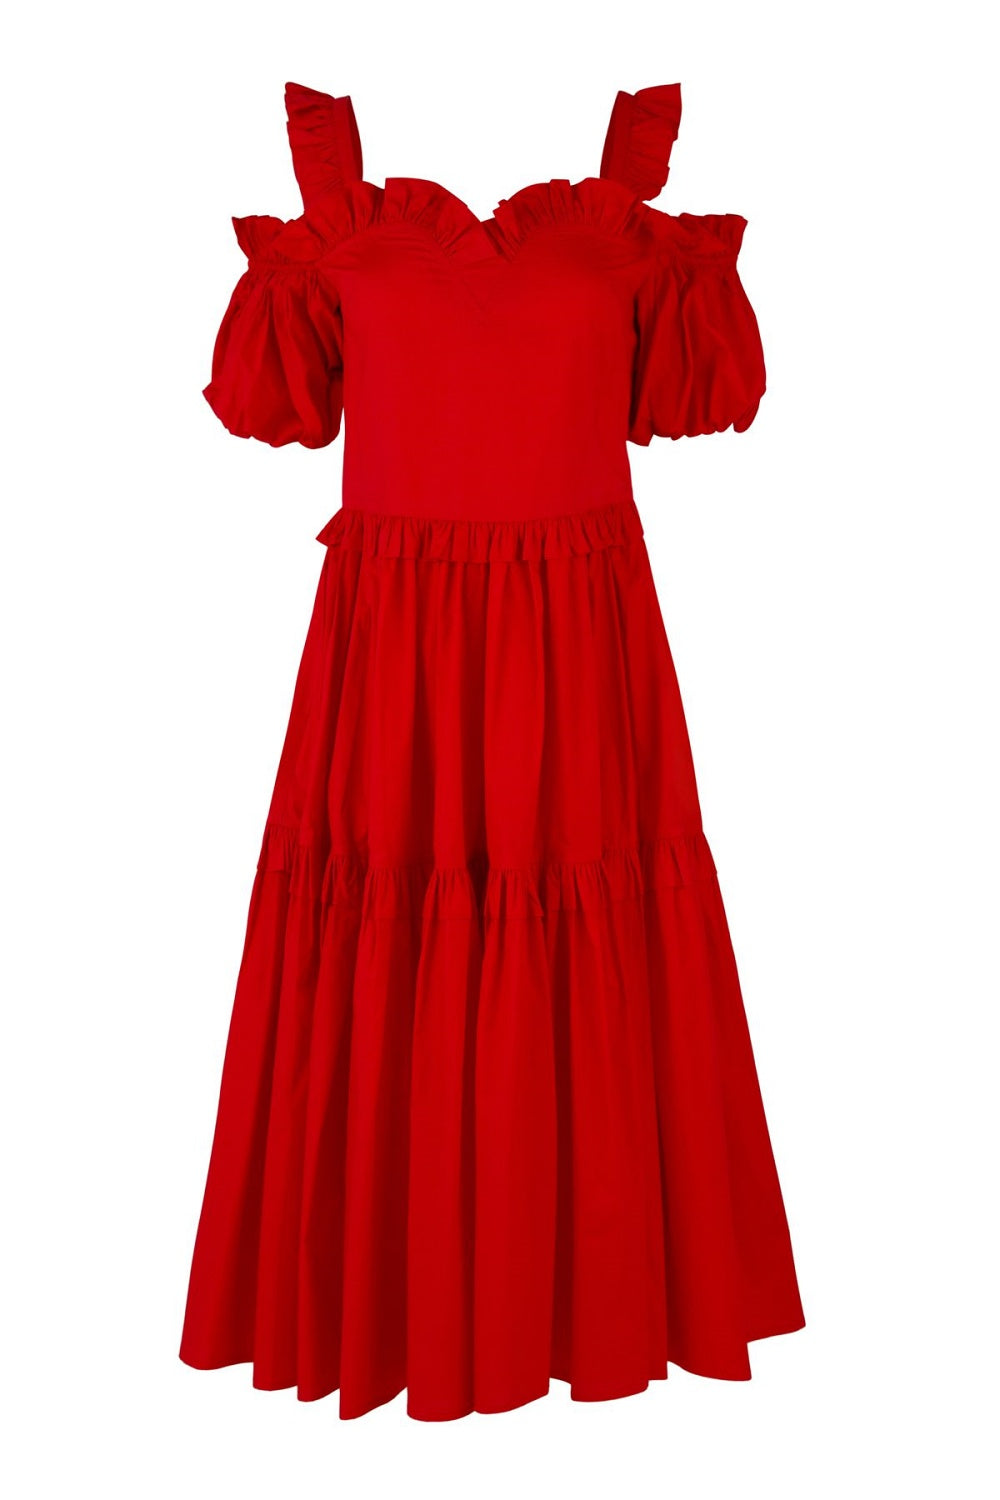 SWEETHEARTS FOREVER DRESS RED